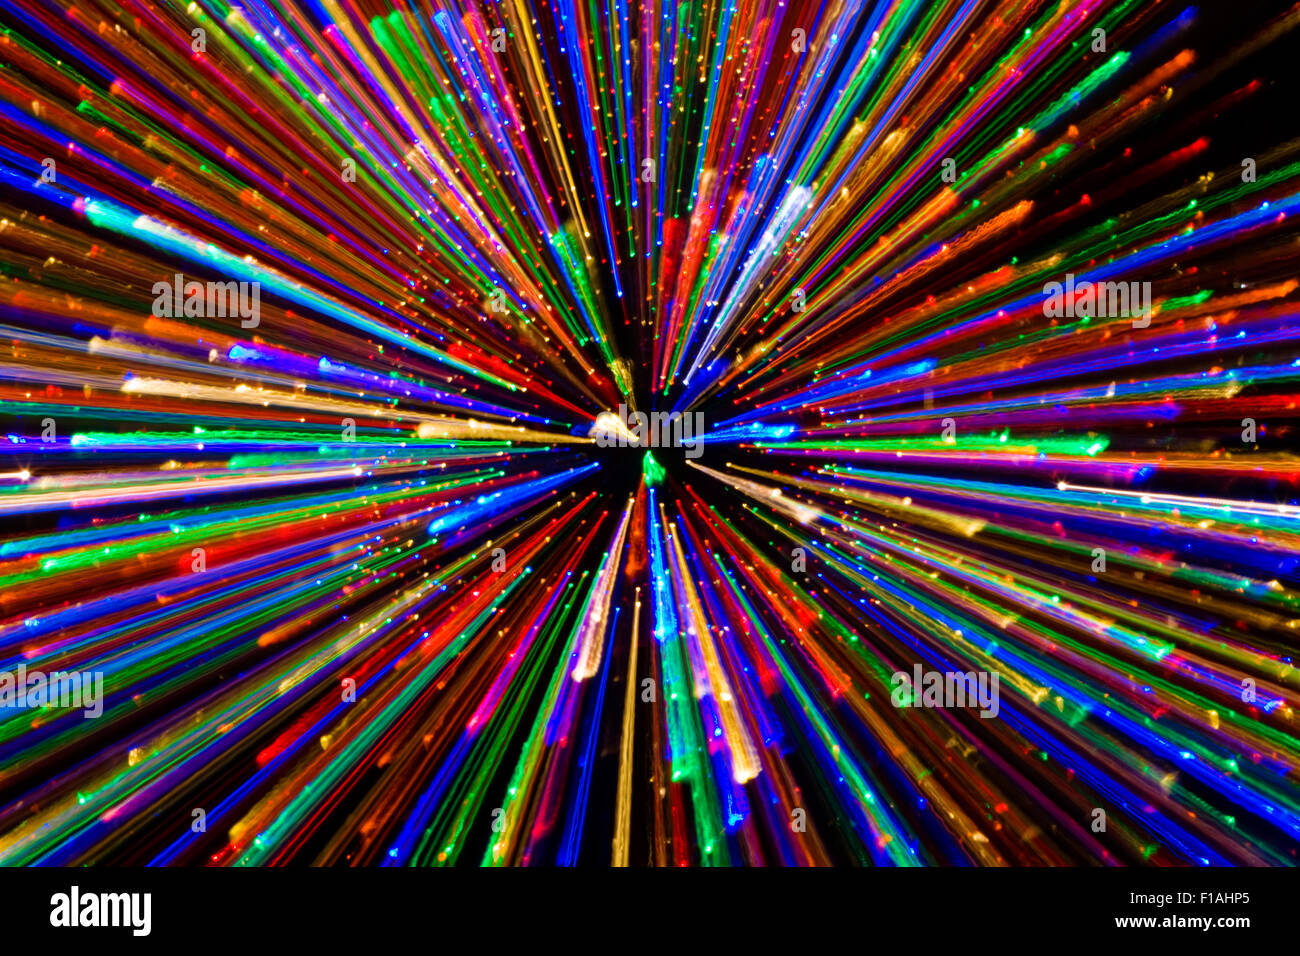 An explosion of vivid colour bursting out to the edge of the image from the middle. the graphic shows light racing towards the camera Stock Photo